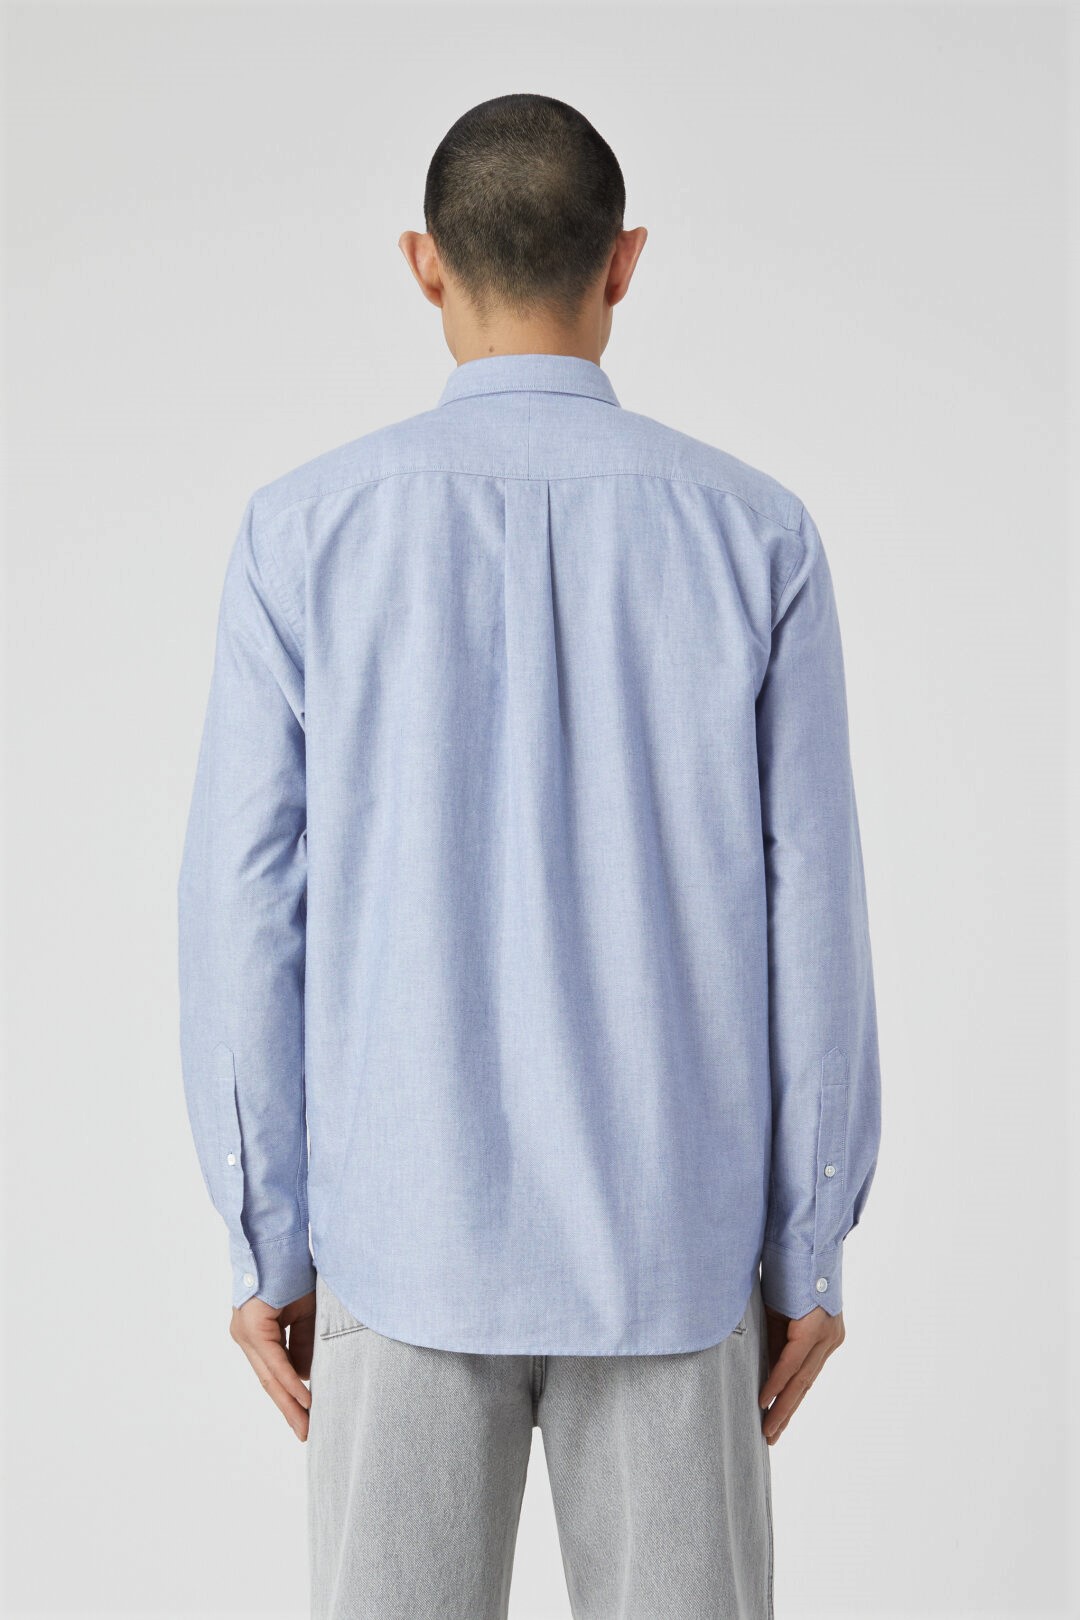 CLOSED Basic Shirt in Blue S